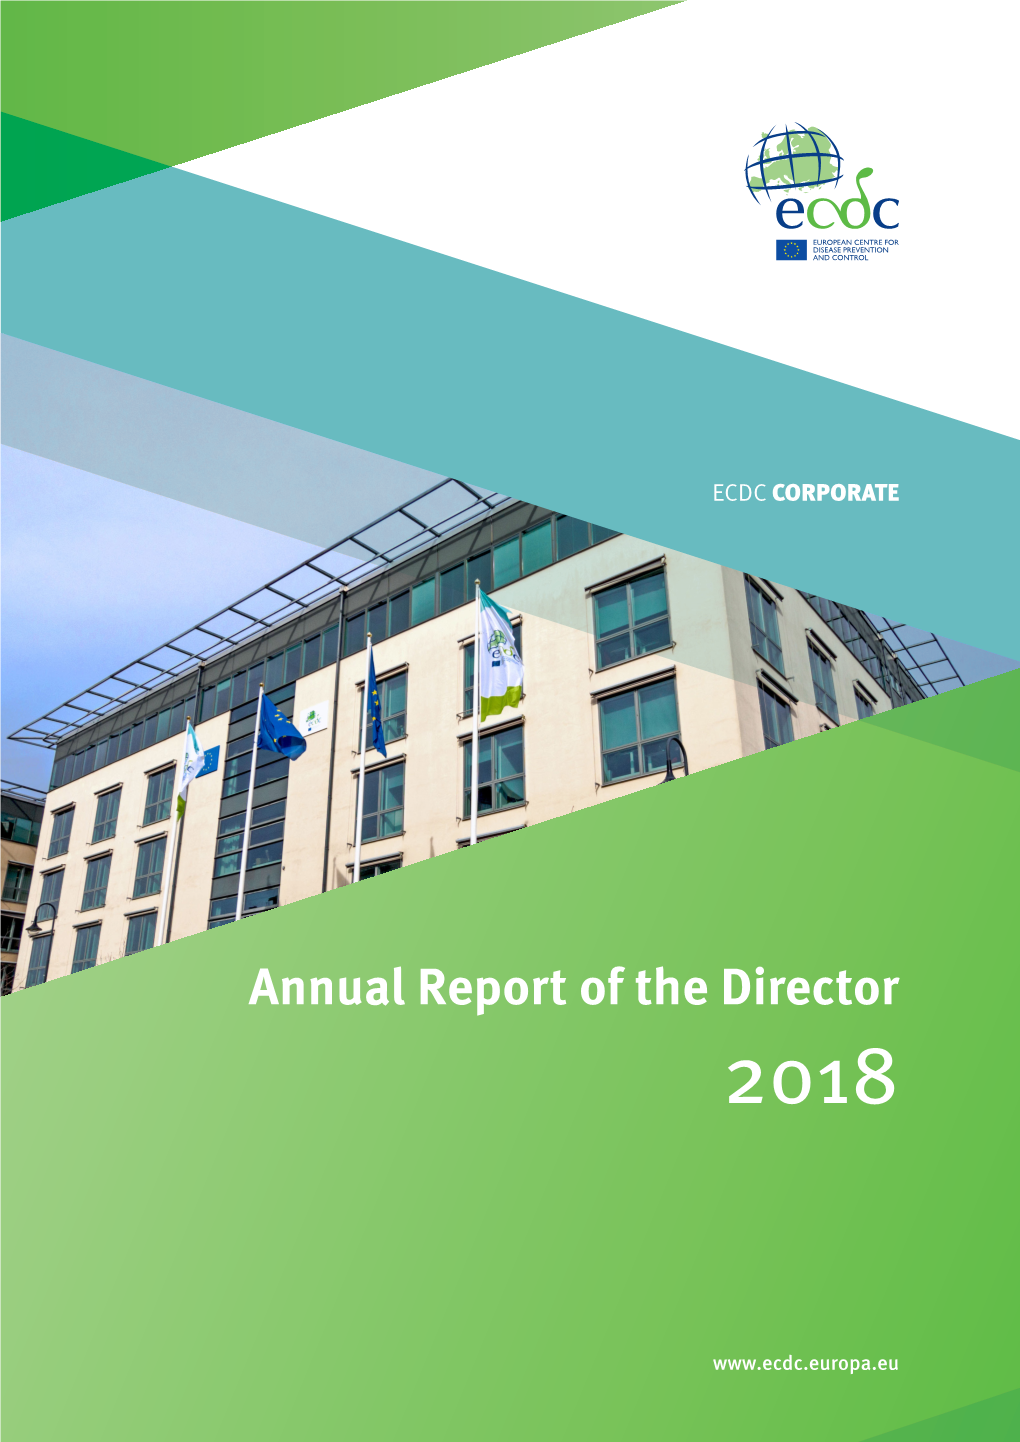 Annual Report of the Director, 2018